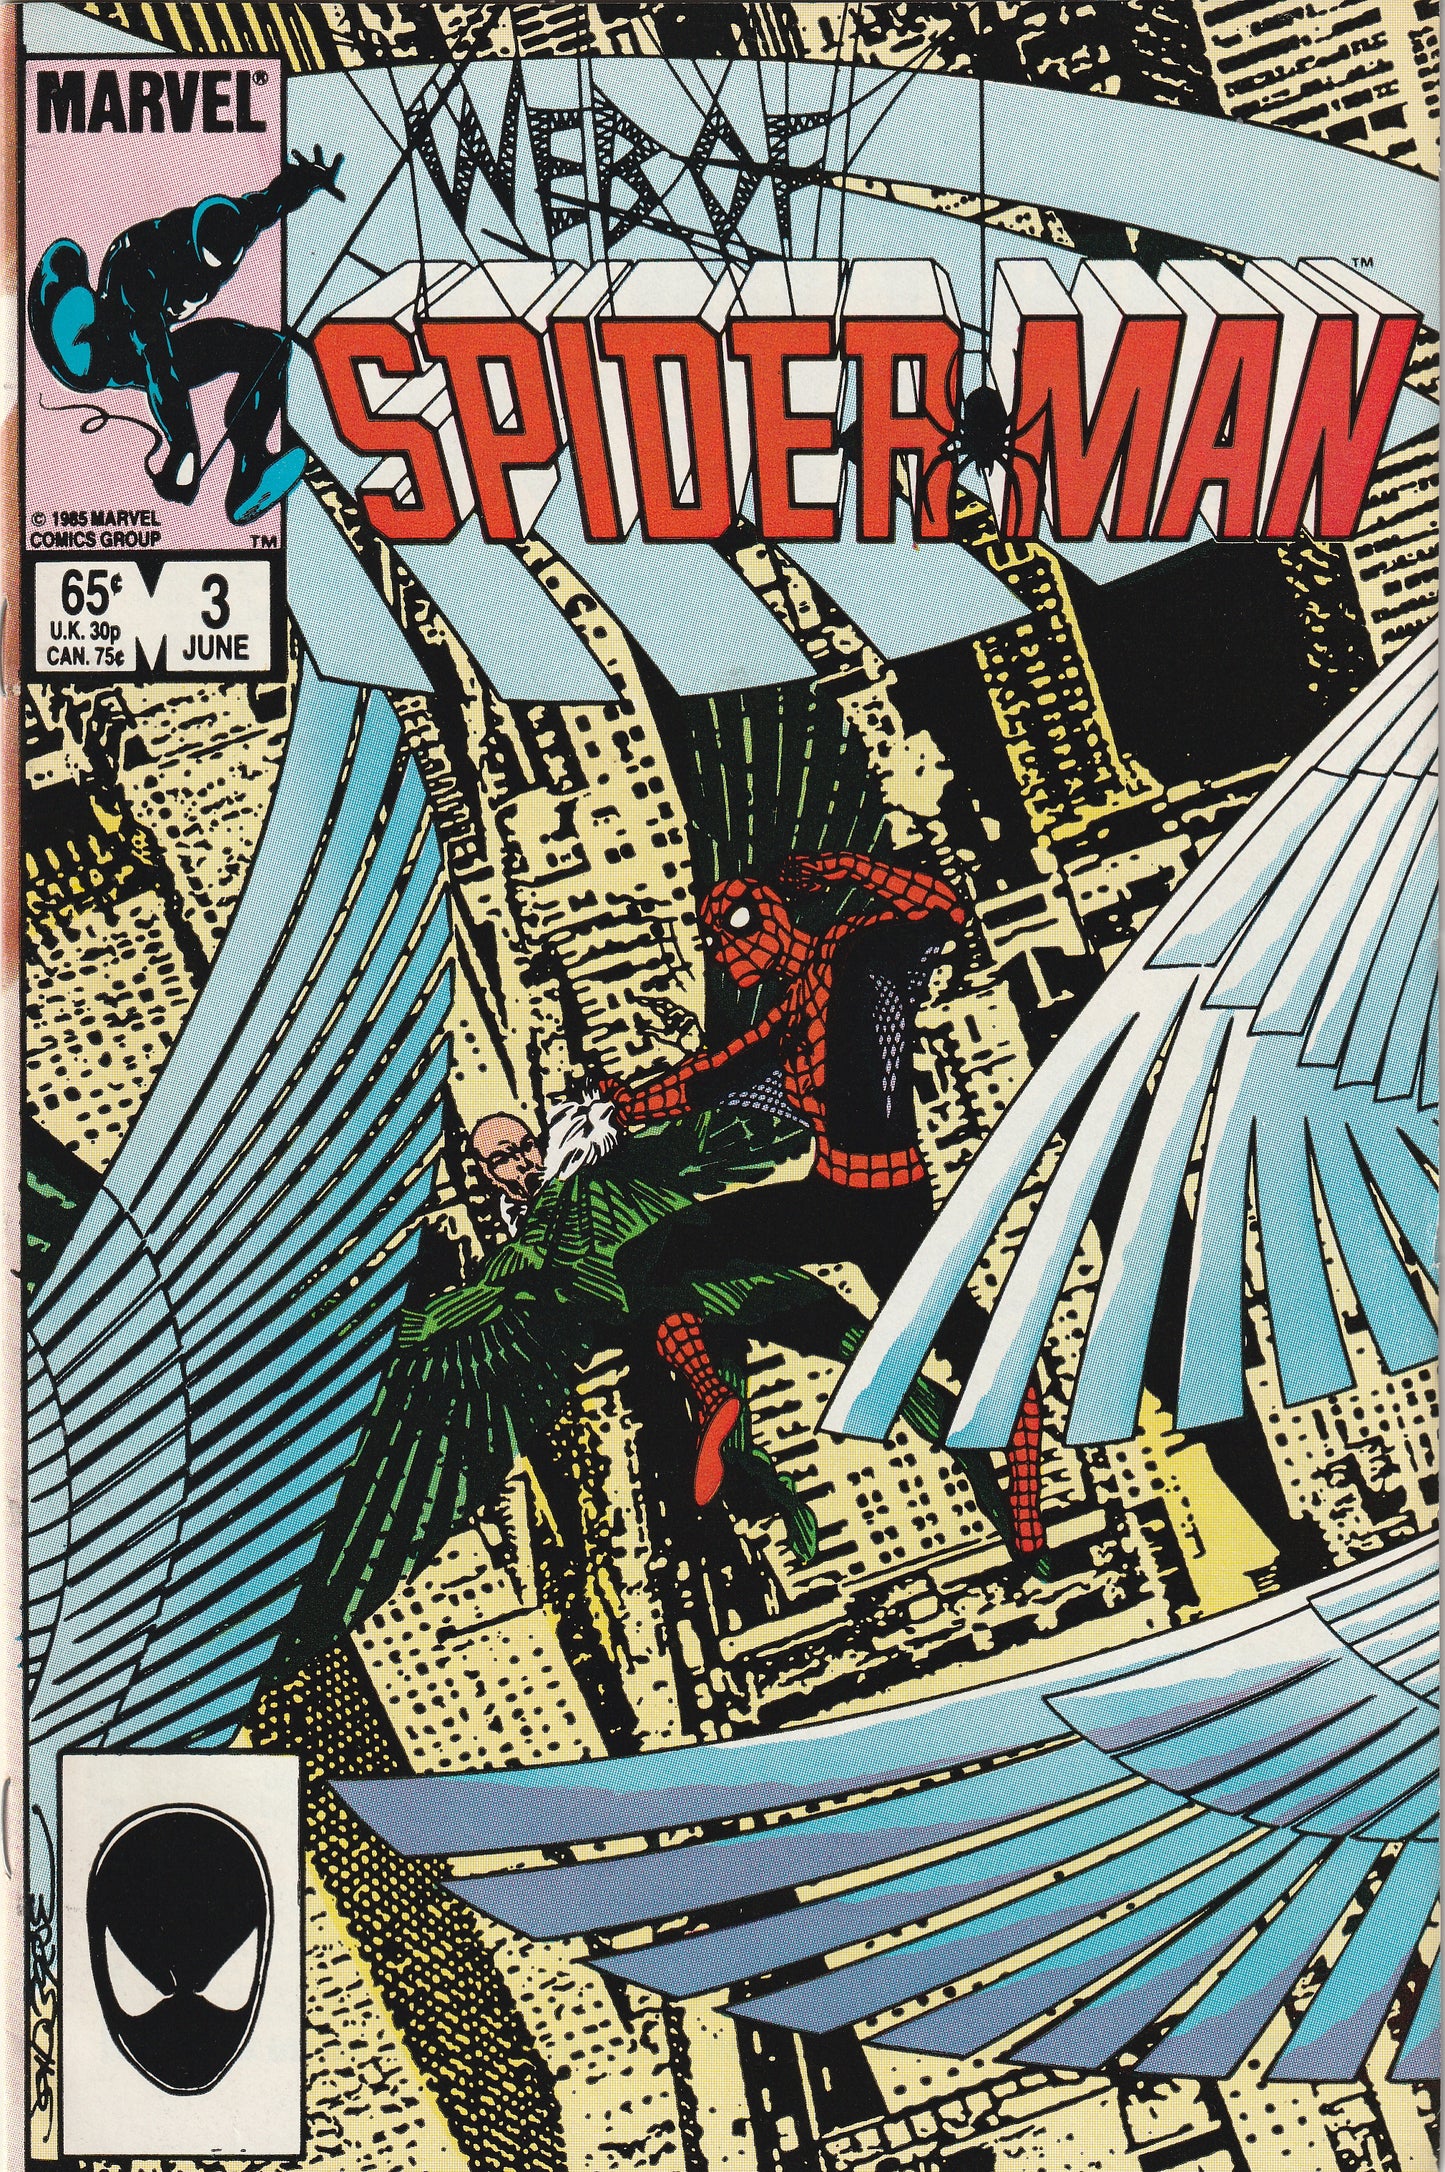 Web of Spider-Man #3 (1985) - Vulture Appearance